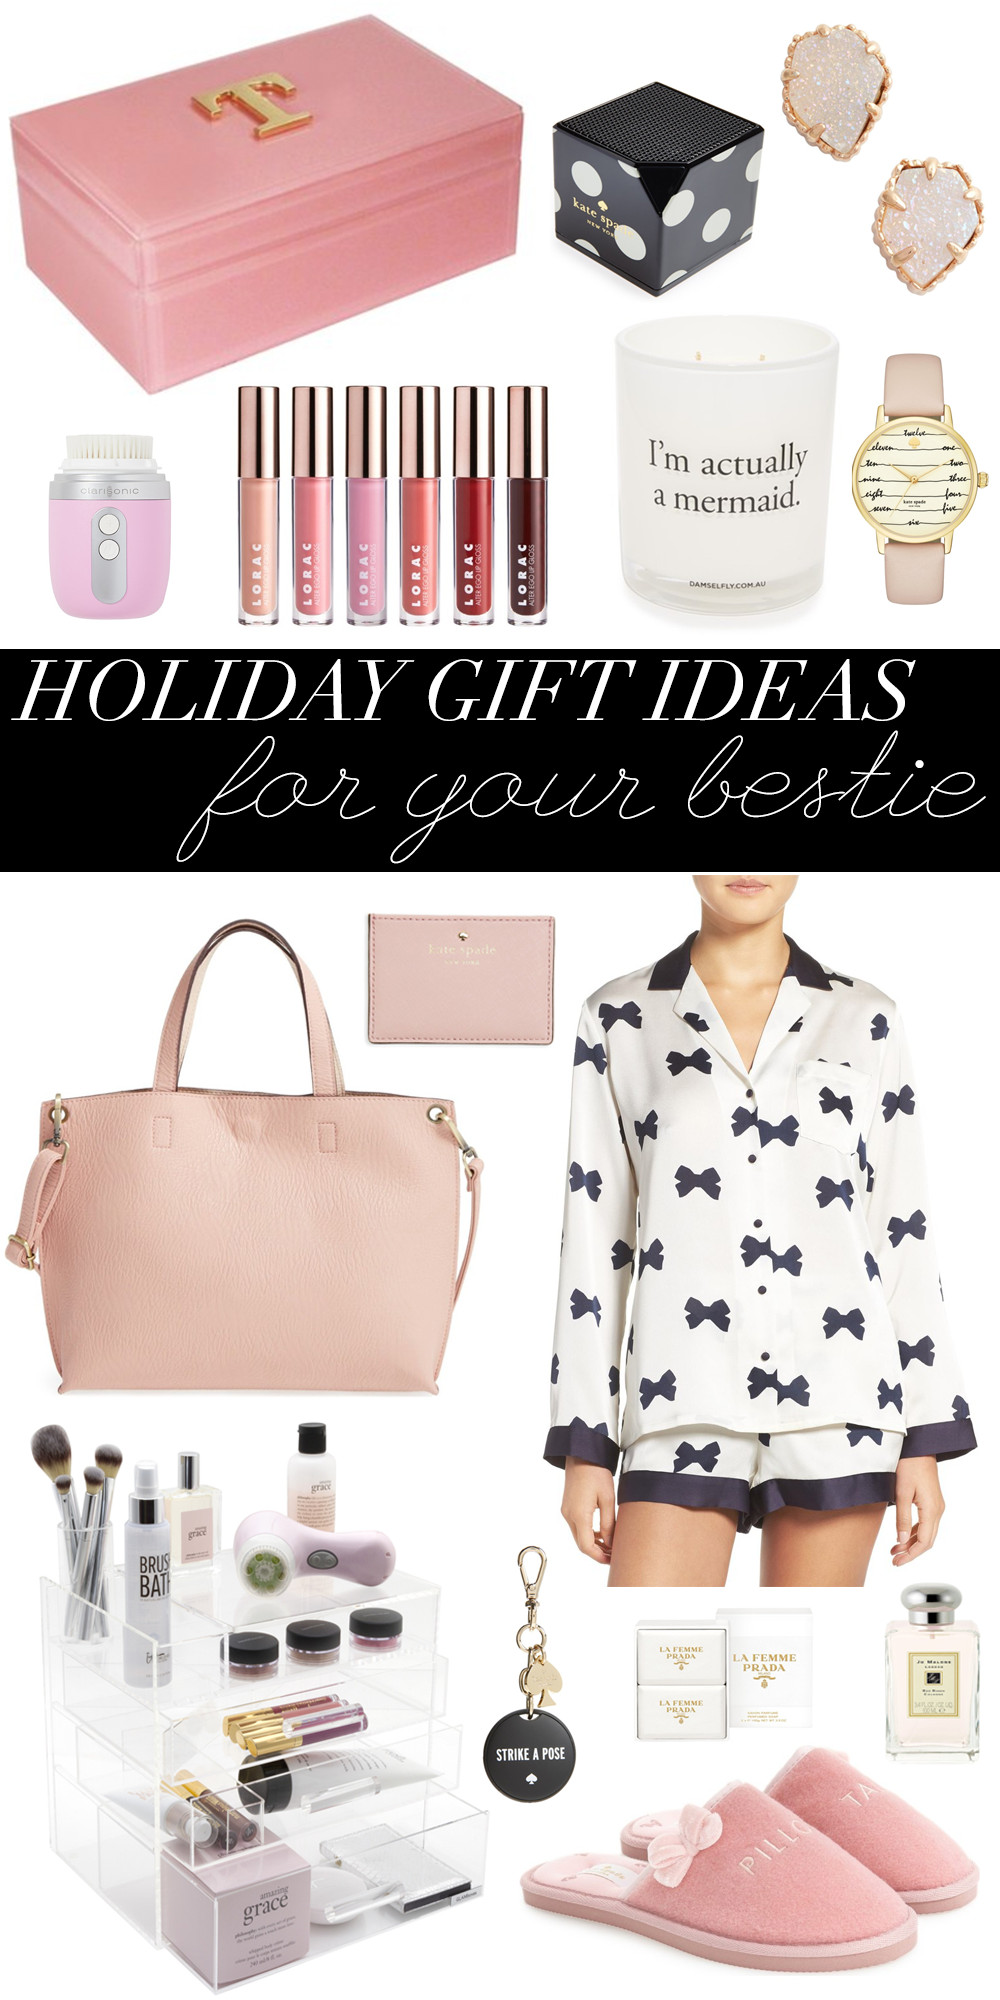 Holiday Gift Ideas For Best Friends
 Holiday Gift Ideas For Your Best Friend Giveaway Money